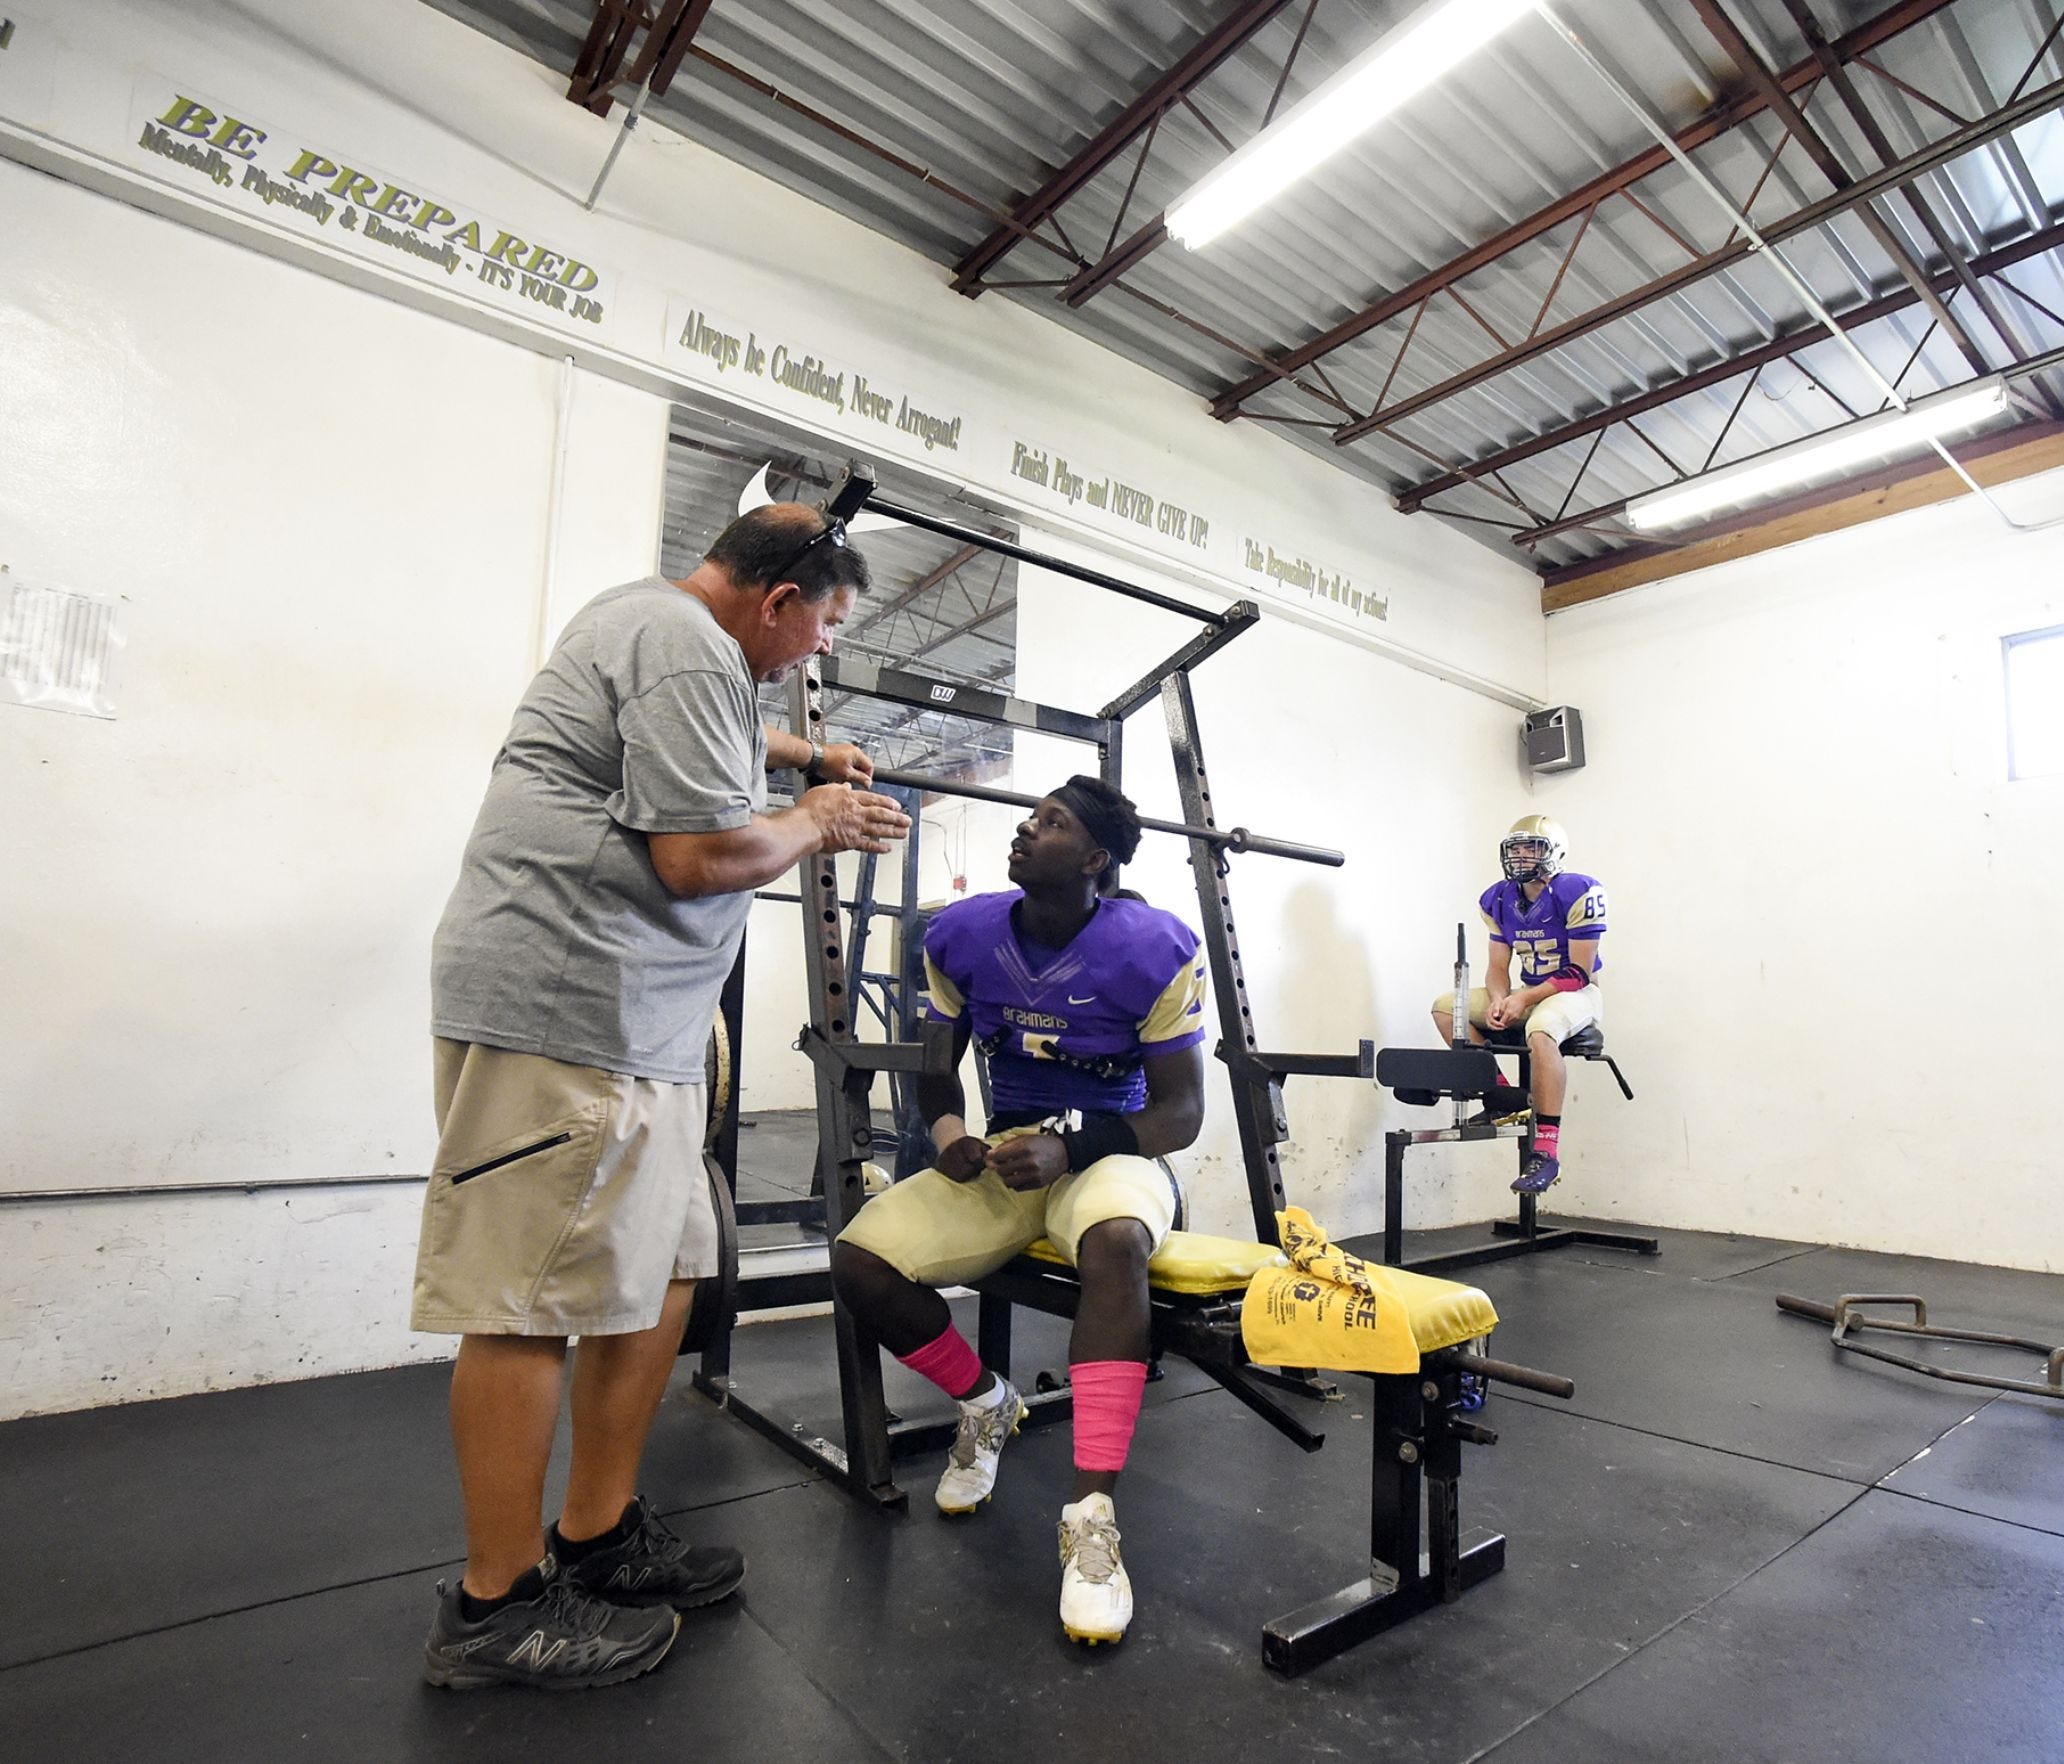 Okeechobee High School assistant coach Glenn Attaway talks with running back/defensive end JaJuan Cherry Monday, Oct. 16, 2017, in the locker room before their team's high school football game against Sebastian River at Okeechobee High School.